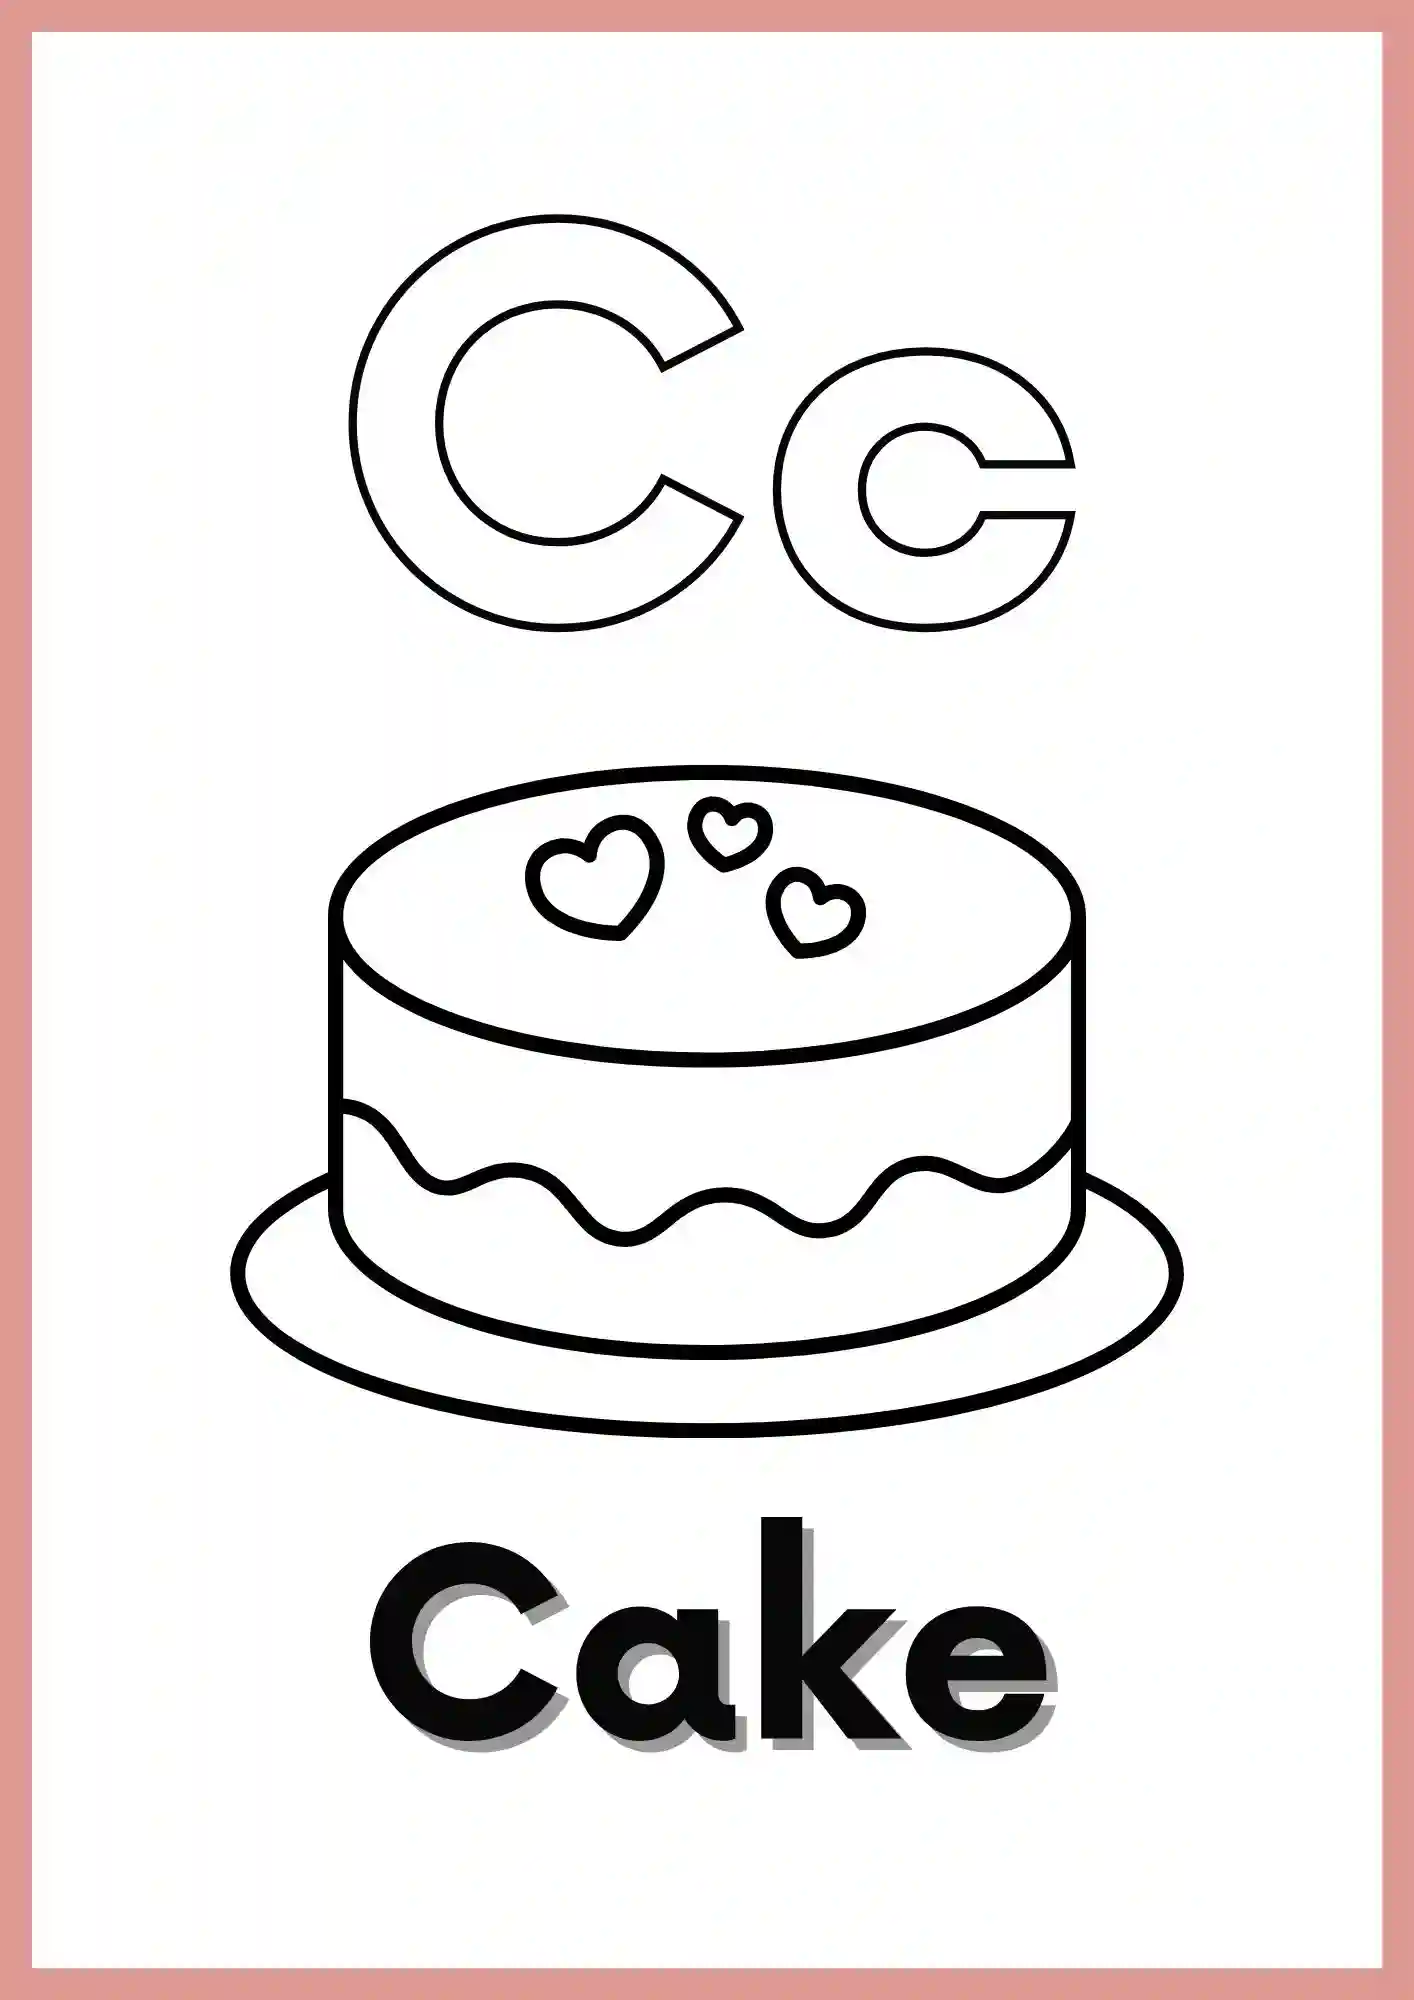 Letter C with CAKE colouring worksheet